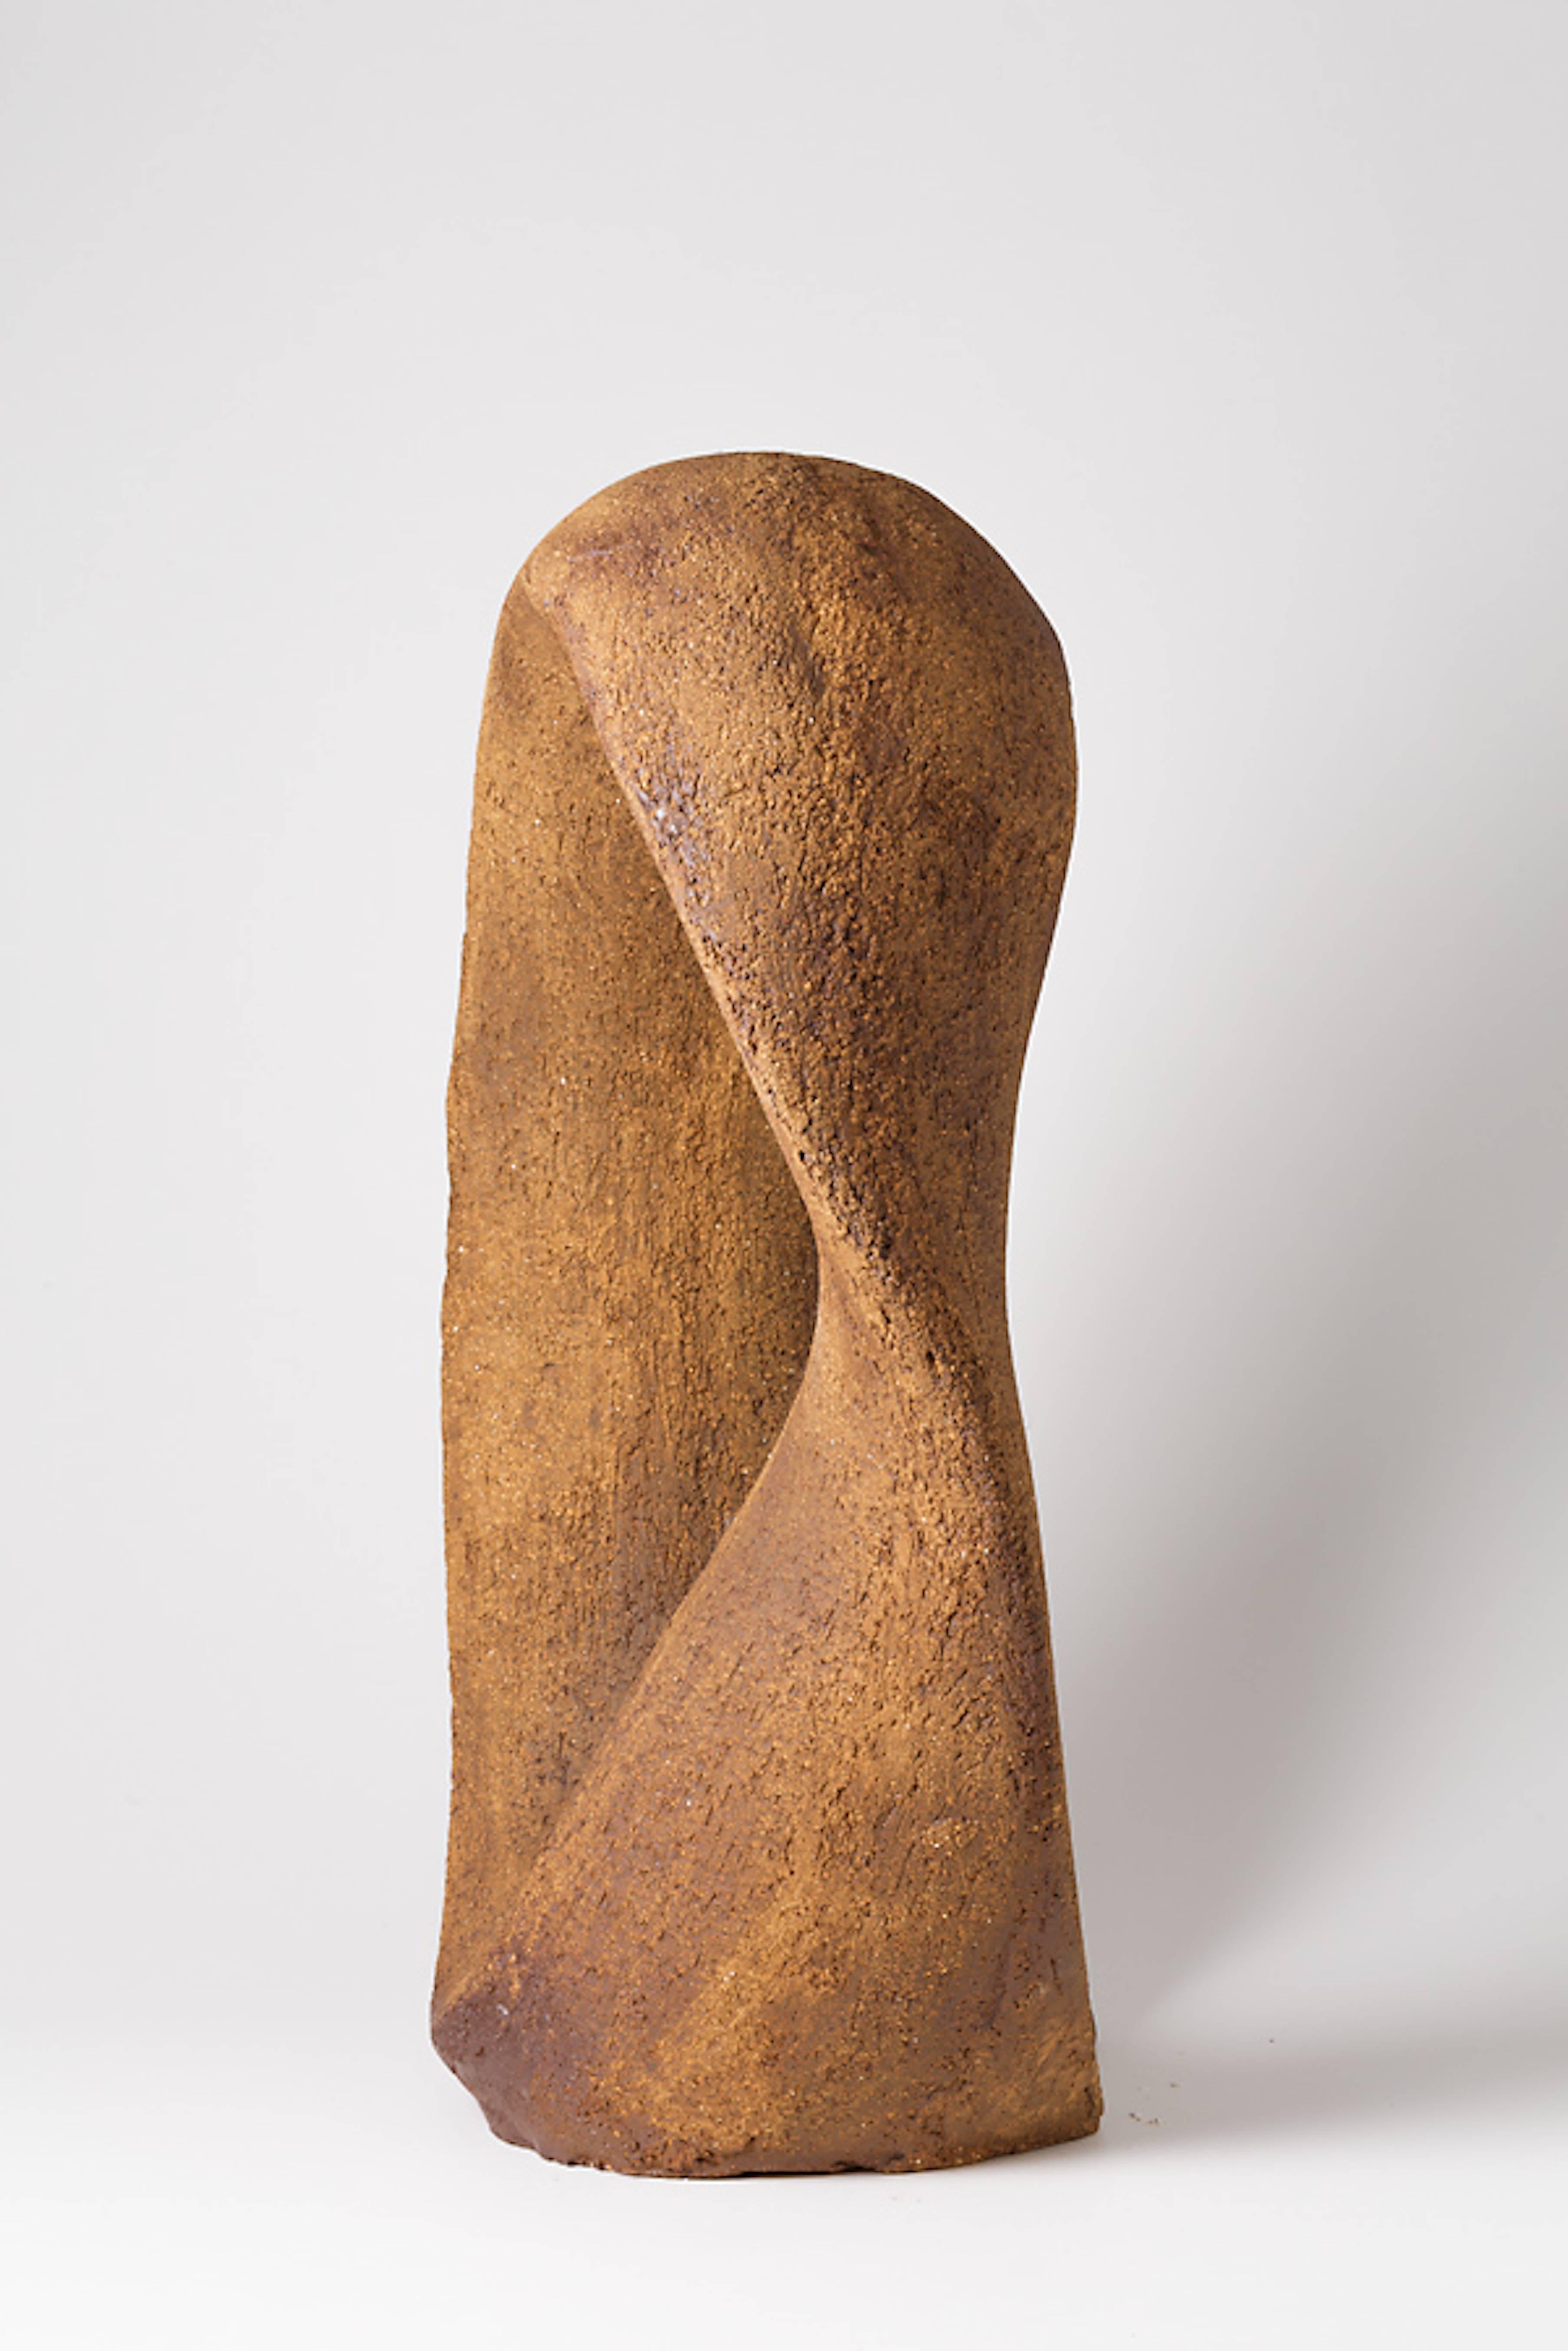 French Important Stoneware Sculpture by Tim Orr, circa 1970-1980 For Sale